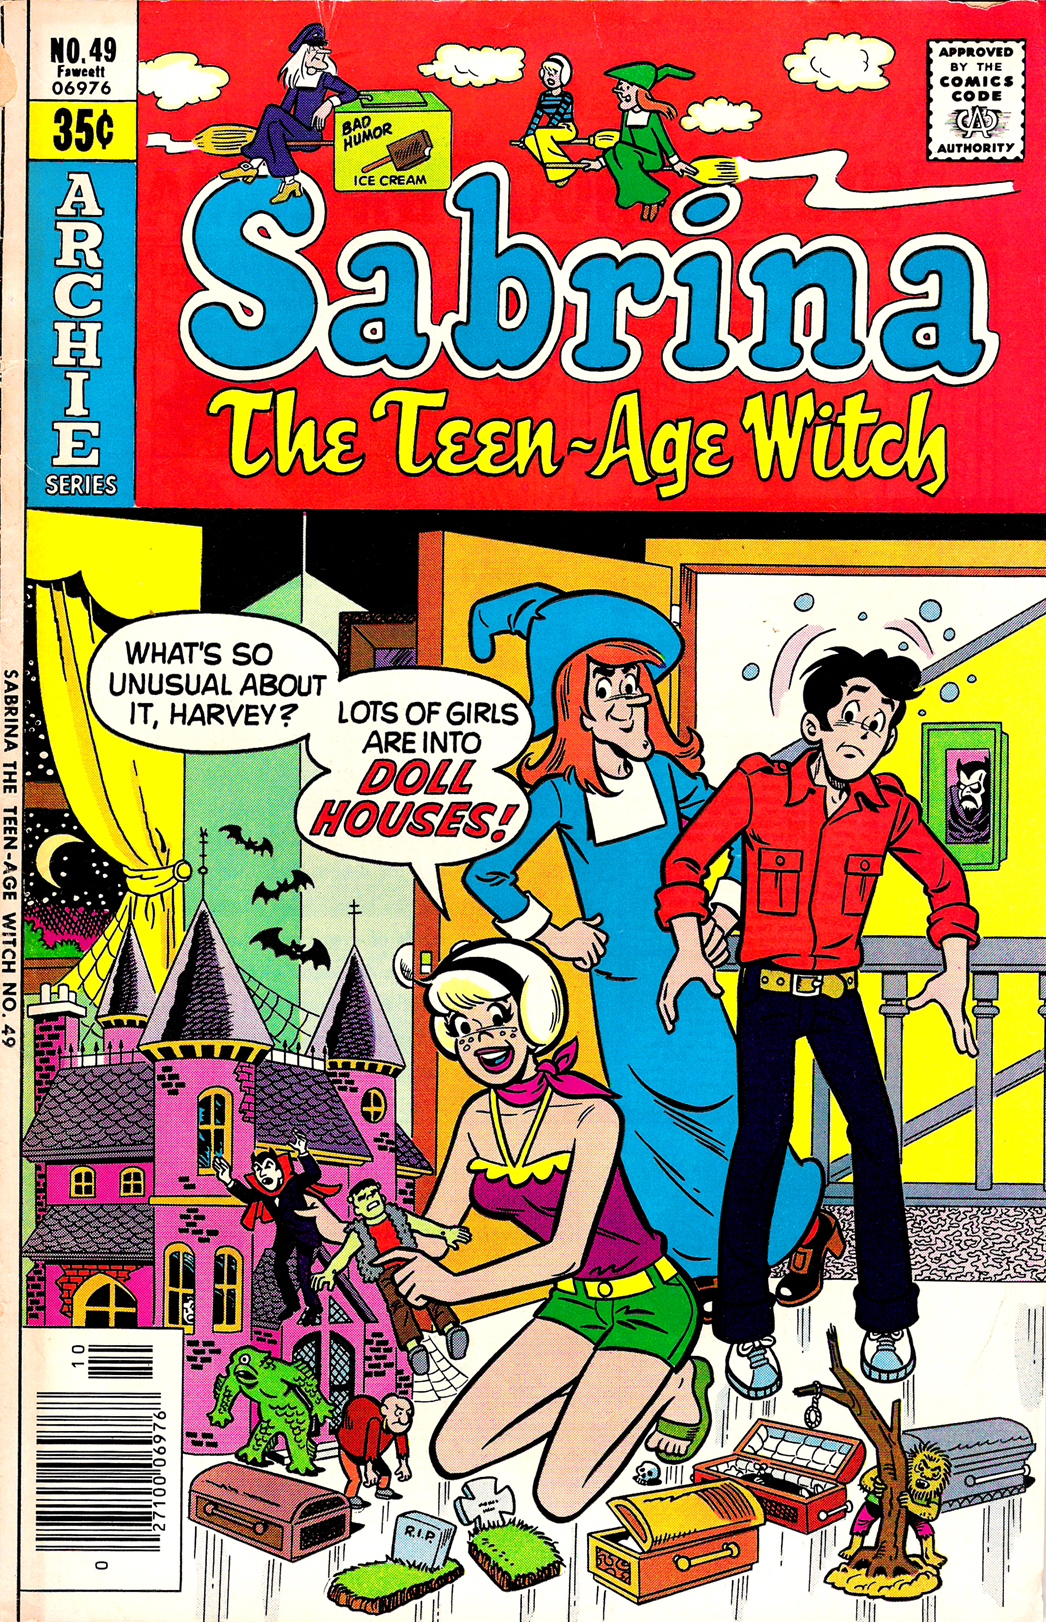 Sabrina The Teenage Witch (1971) Issue #49 #49 - English 1